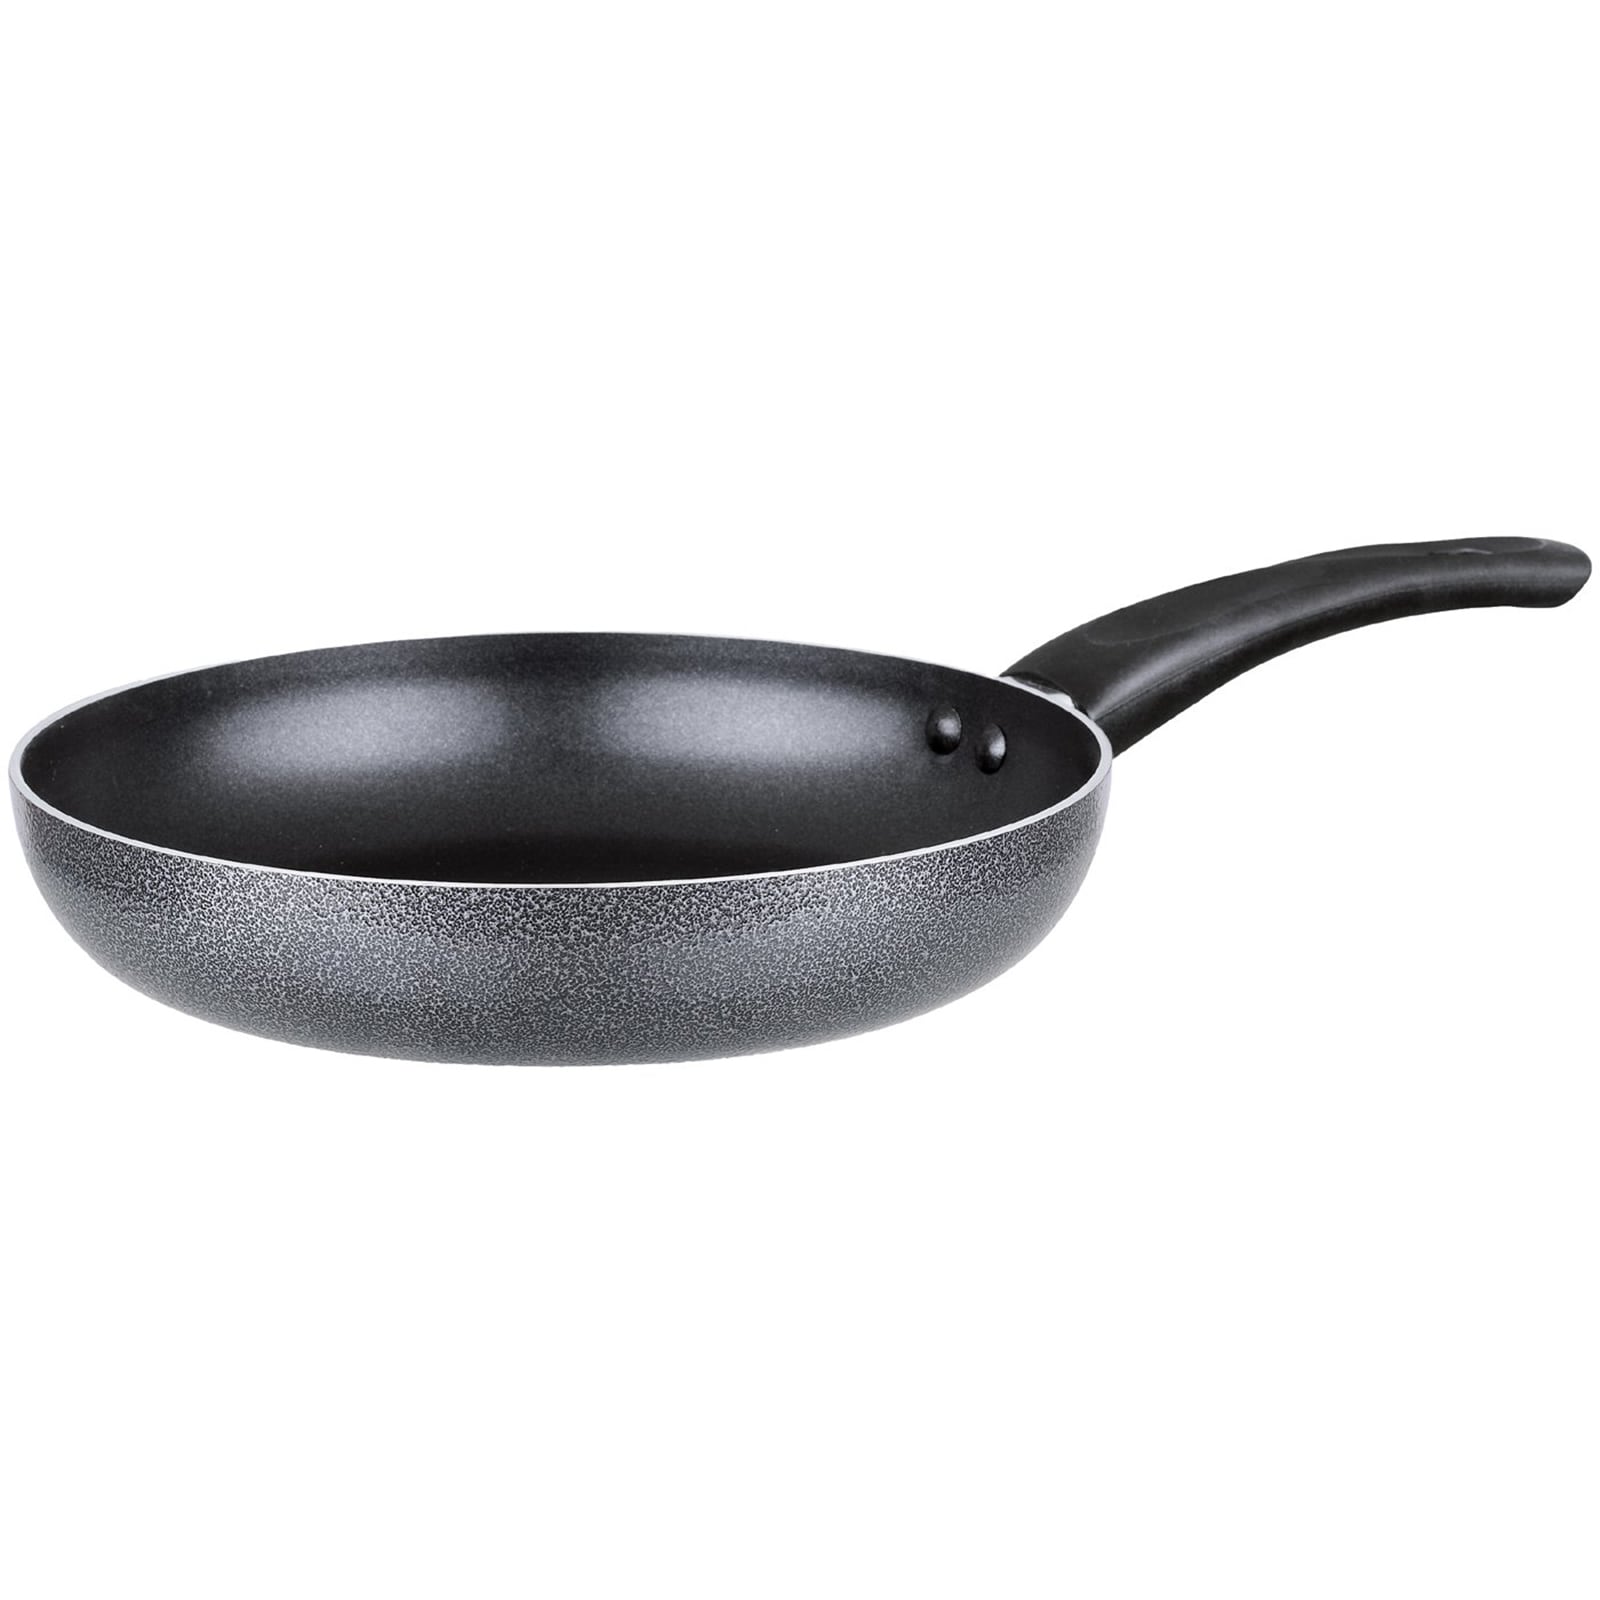 KitchenAid Hard-Anodized Induction Nonstick Frying Pan with Lid, 12.25-Inch  Matte Black 80123 - Best Buy